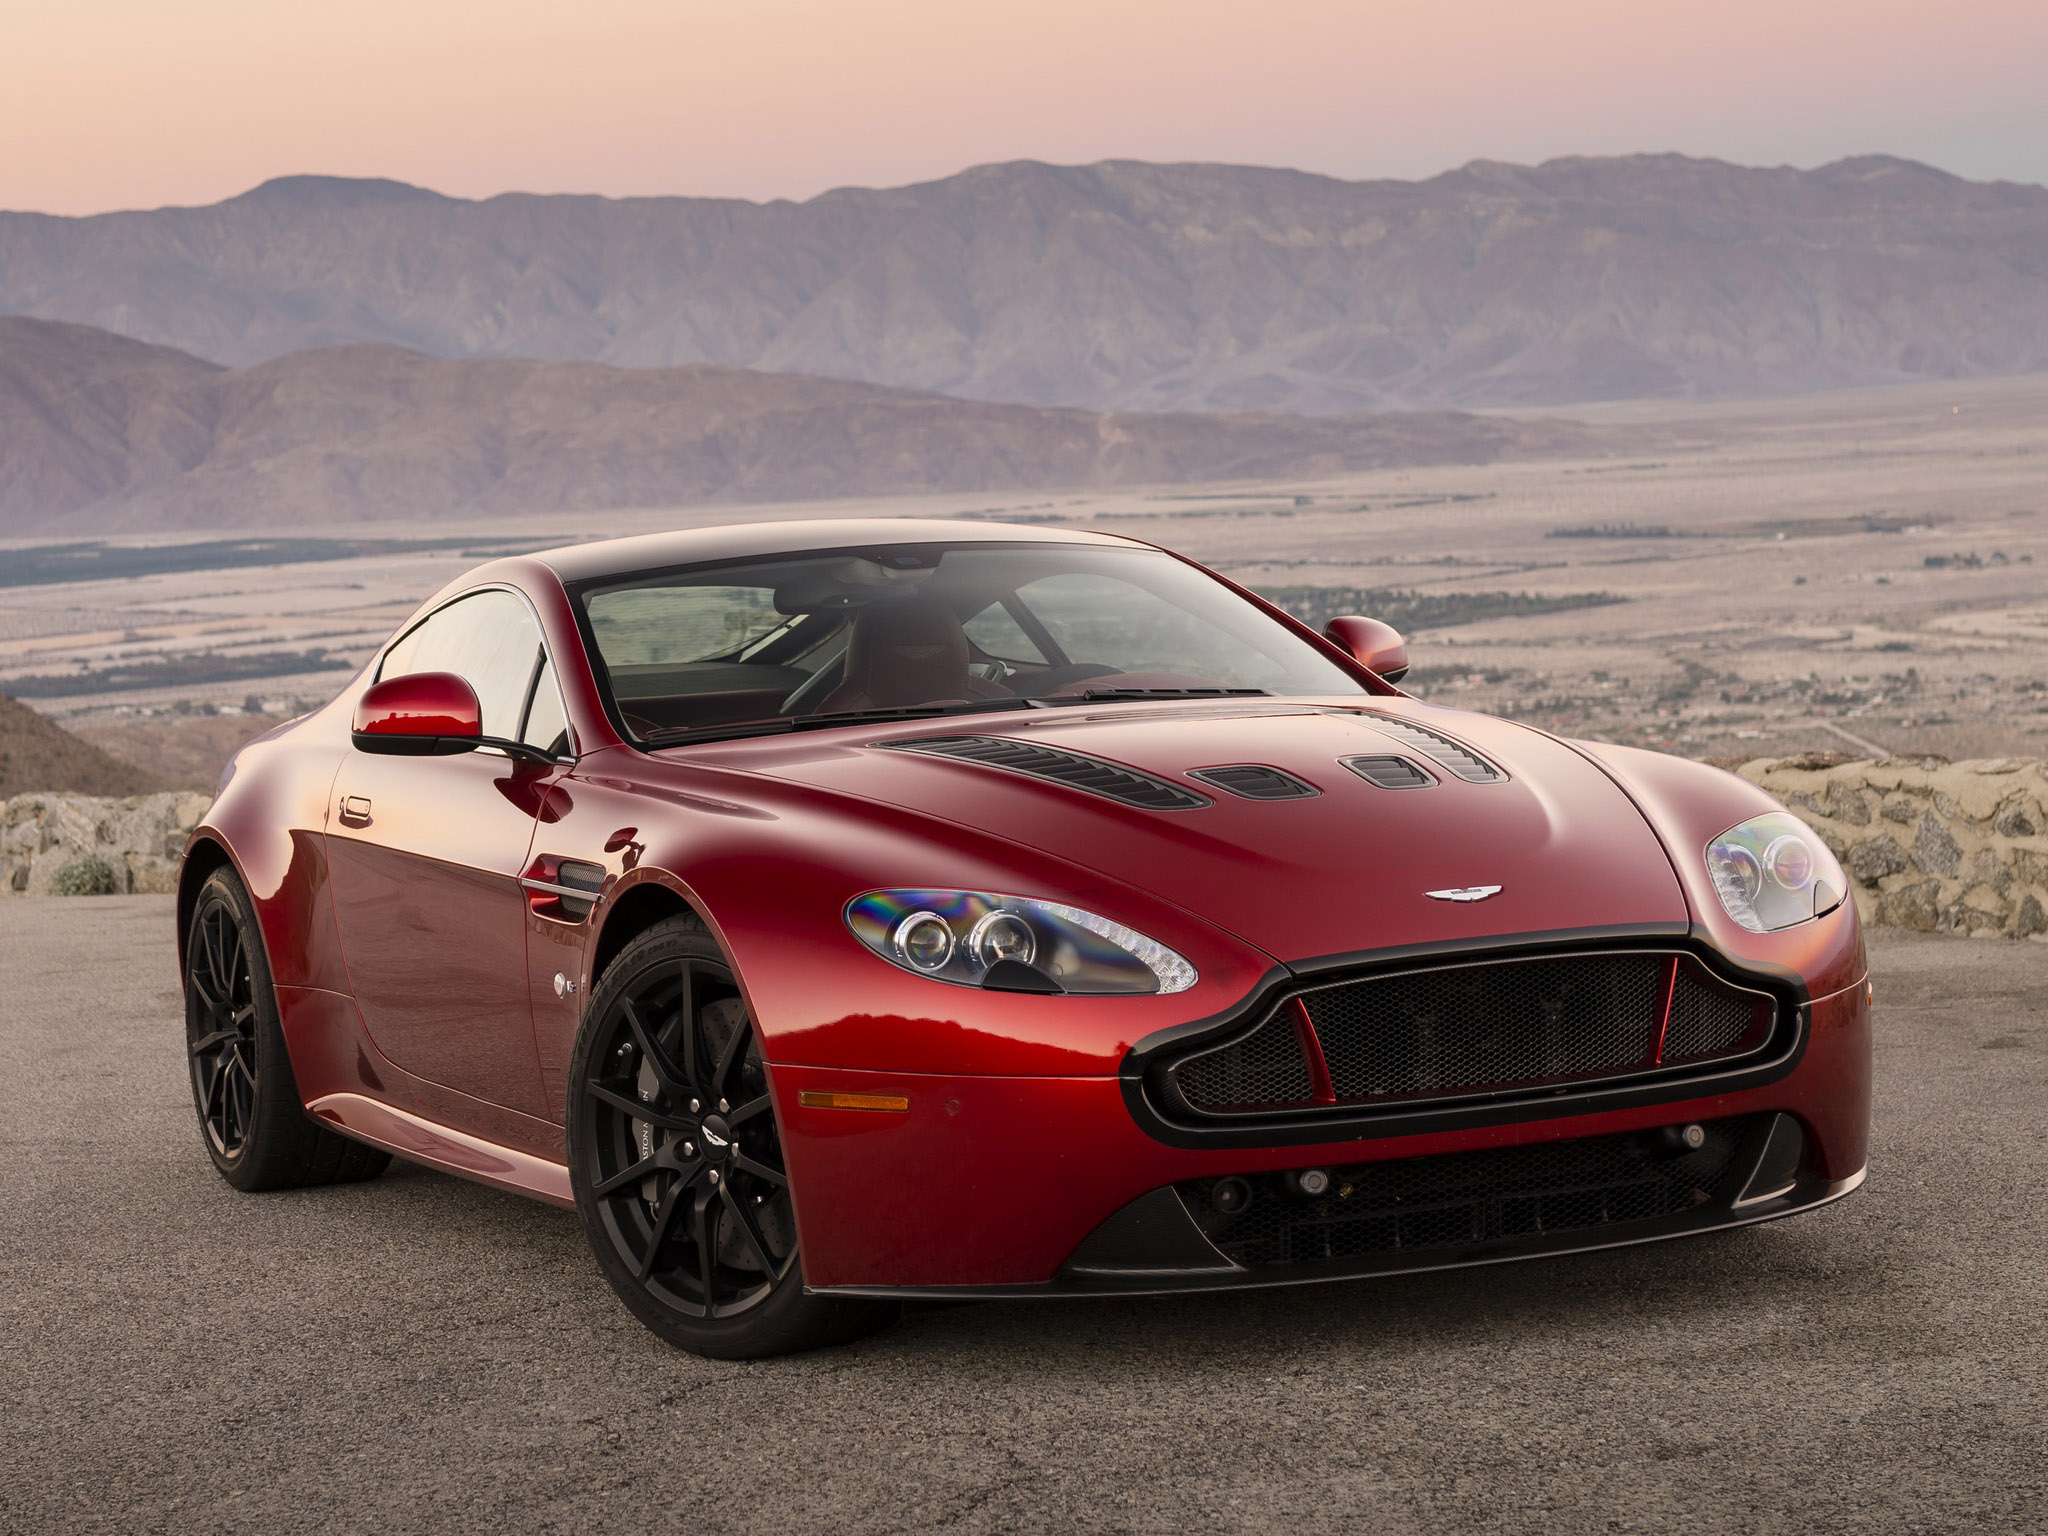 About Vehicles Love To Have A Red Aston Martin Wallpaper HD